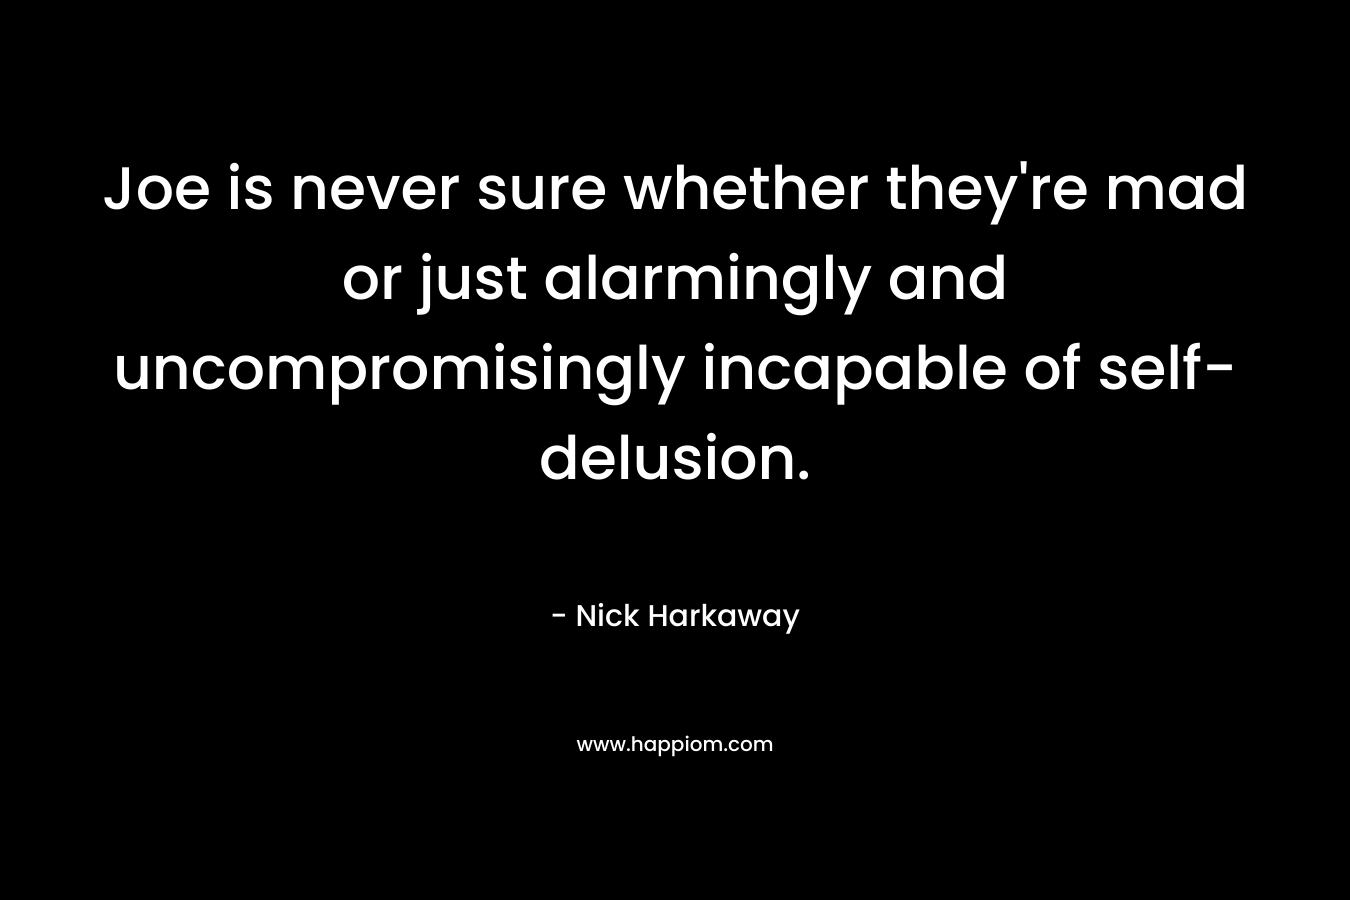 Joe is never sure whether they’re mad or just alarmingly and uncompromisingly incapable of self-delusion. – Nick Harkaway